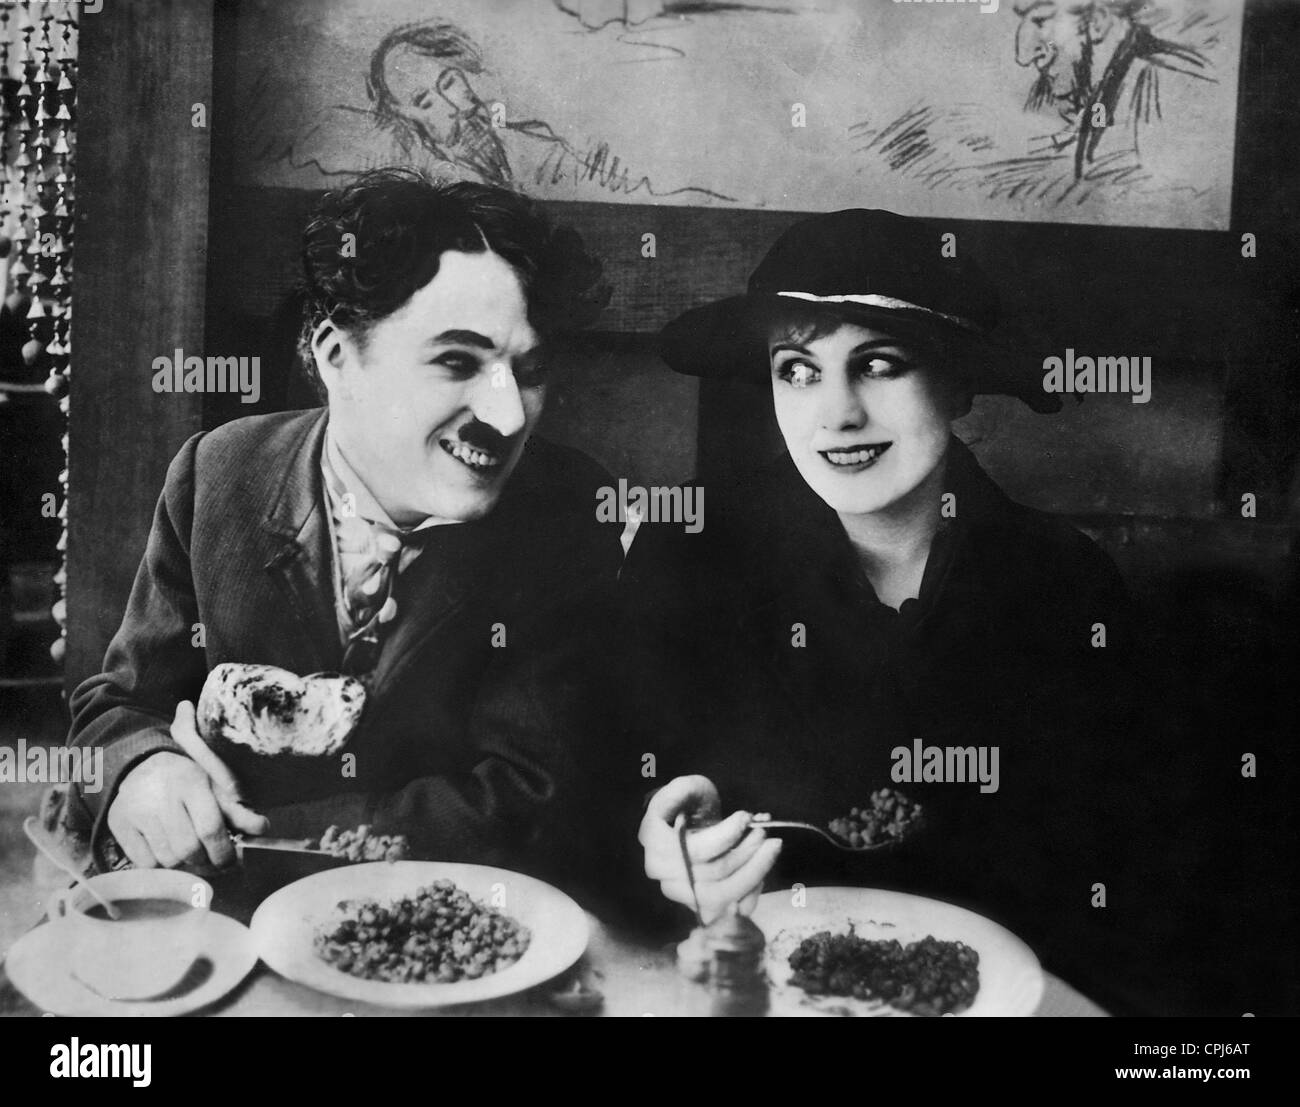 Charles Chaplin and Edna Purviance in 'The Immigrant', 1916 Stock Photo